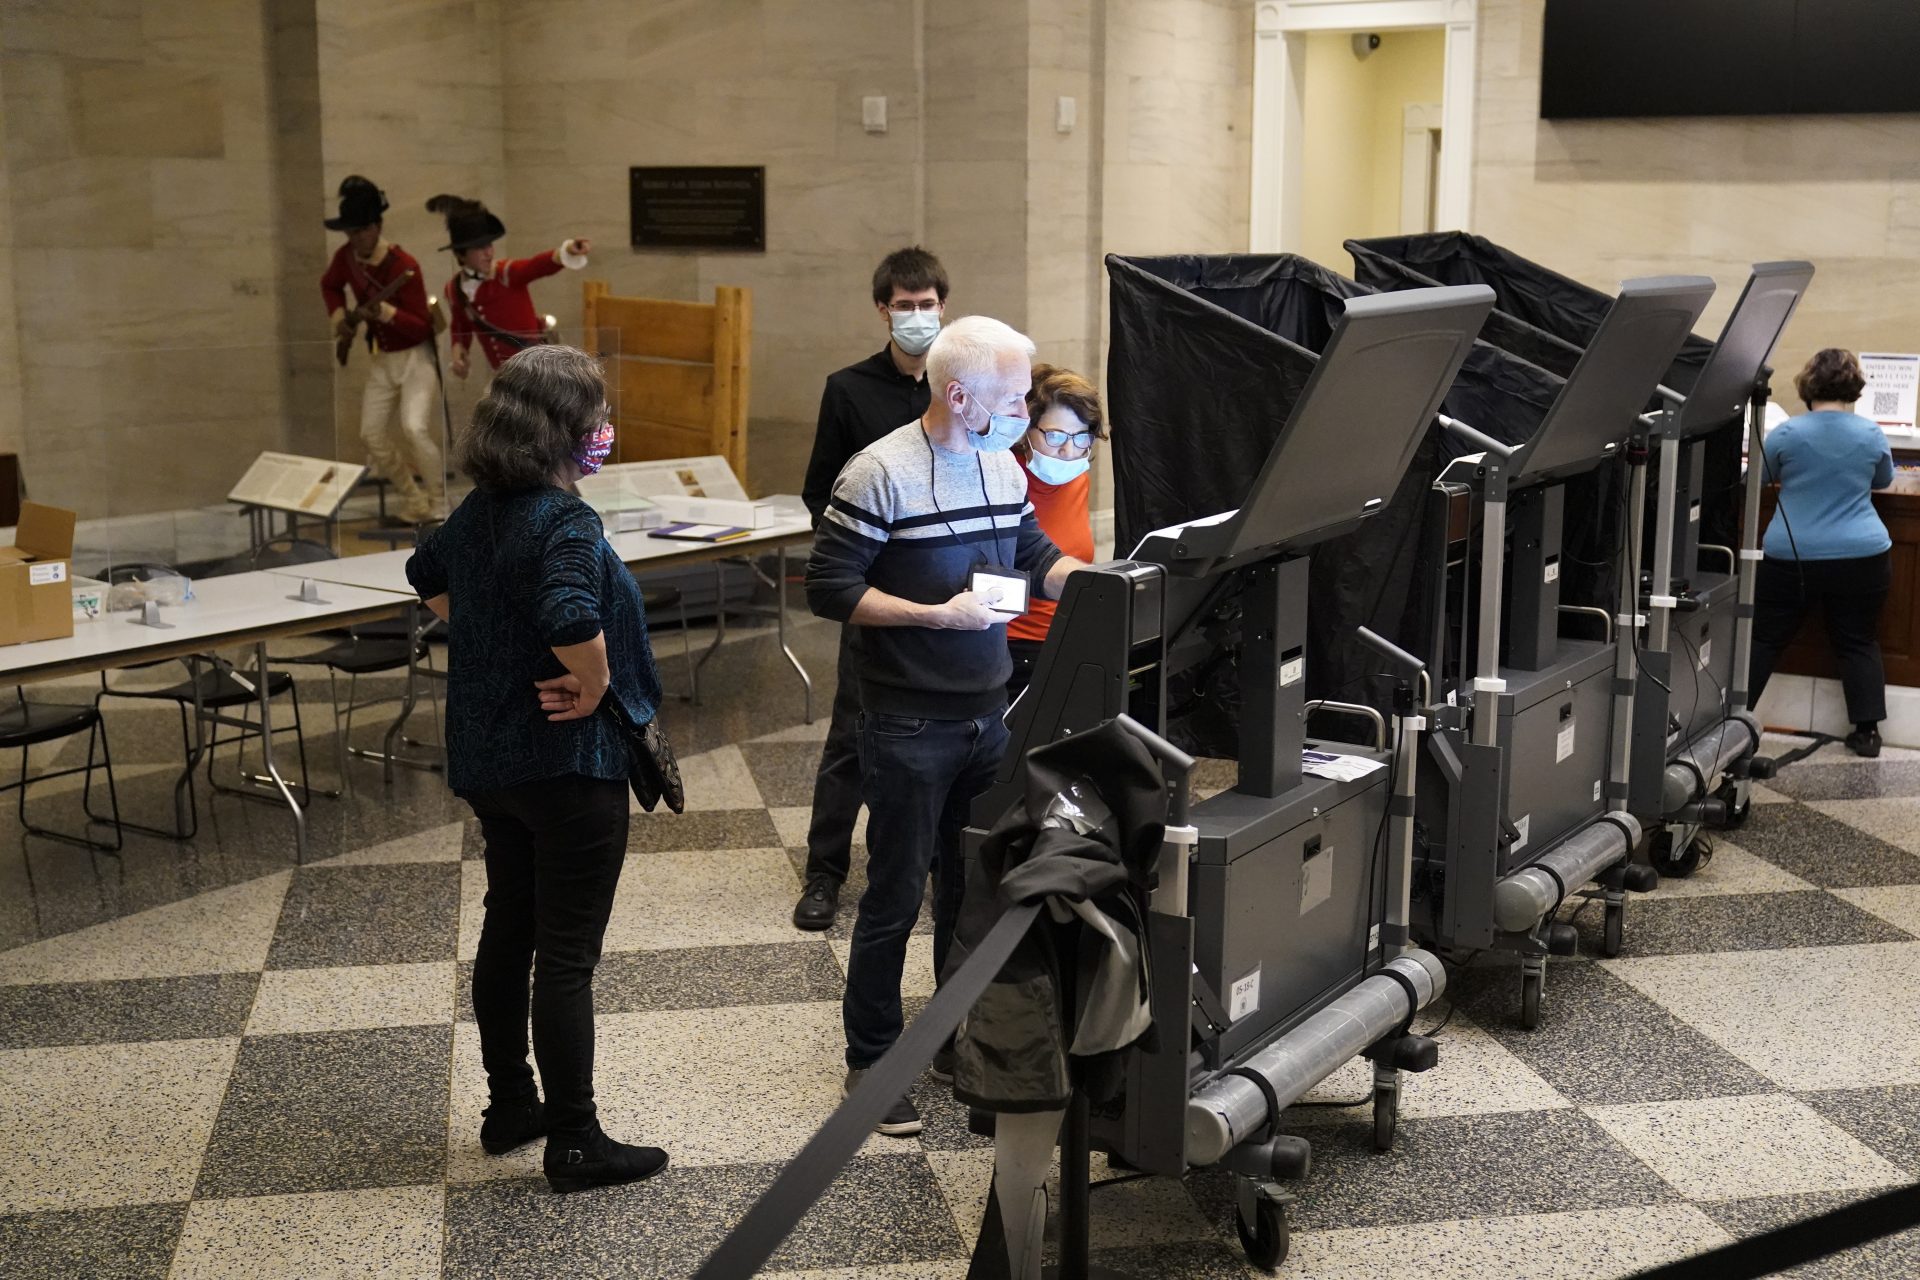 Election workers prepare for voters at the polling place located in the Museum of the American Revolution in Philadelphia, Tuesday, Nov. 2, 2021.